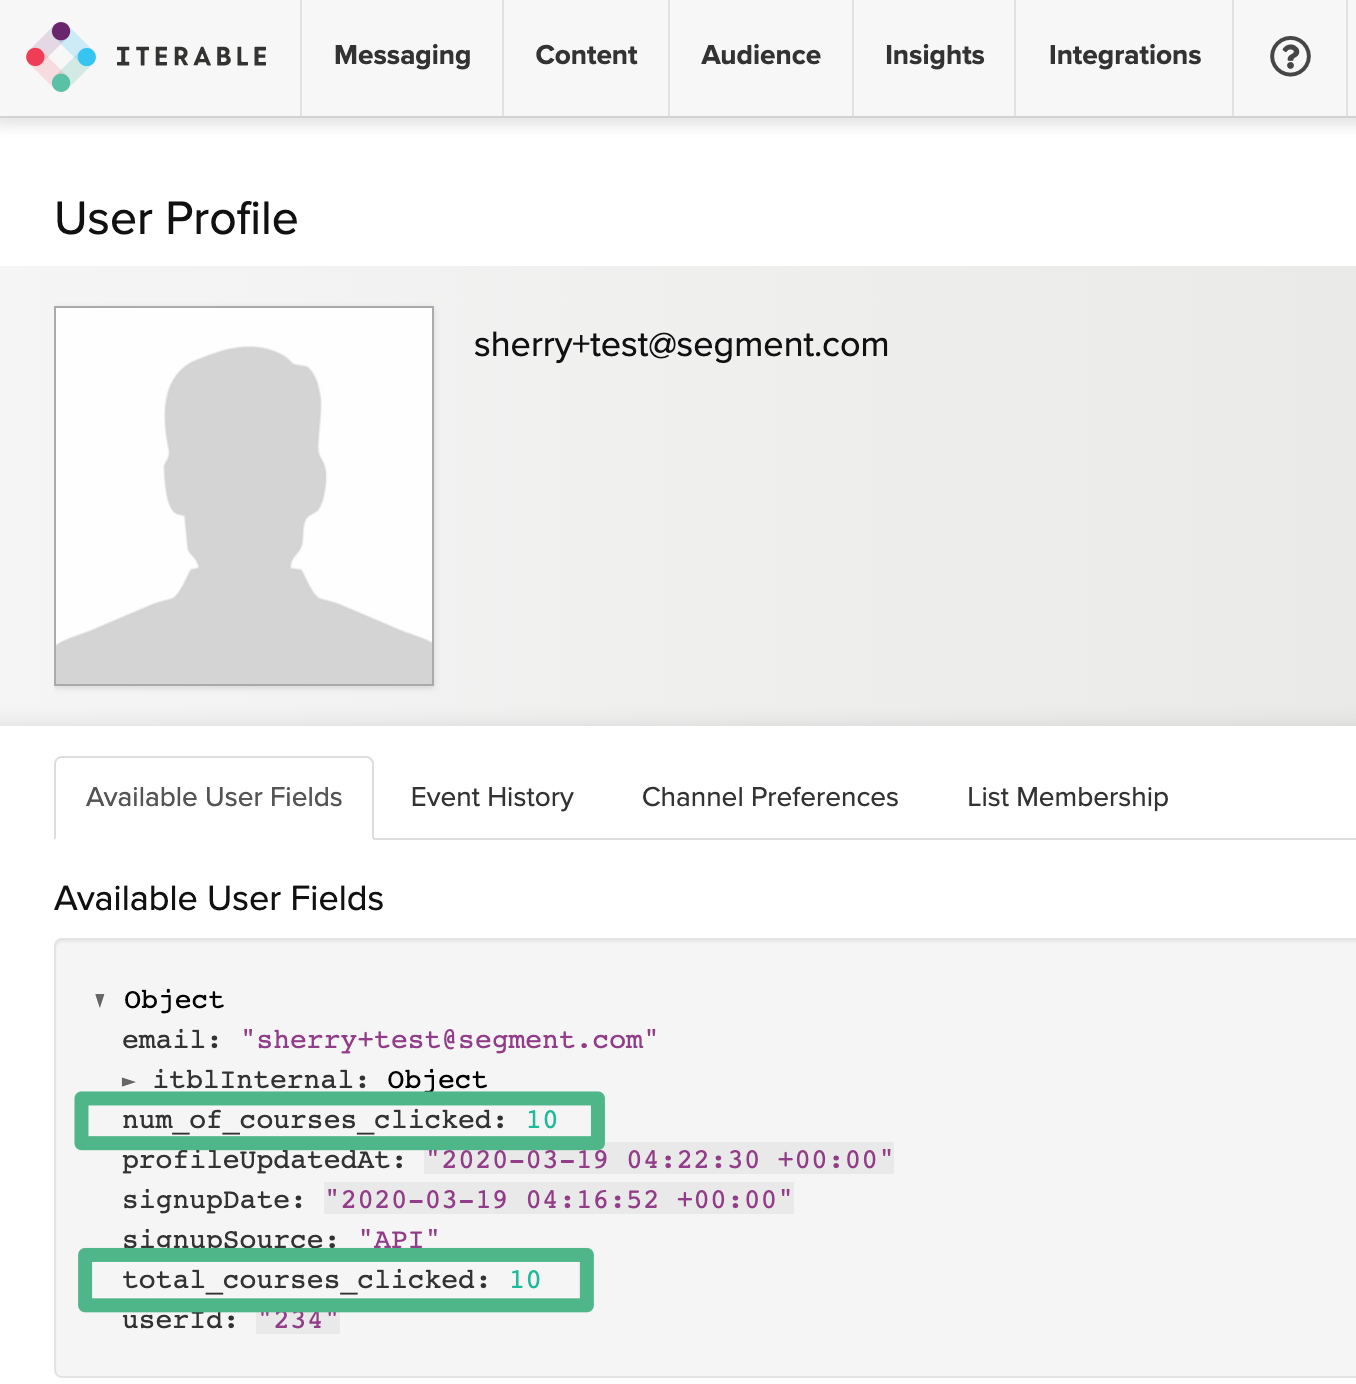 A screenshot of a user profile in Iterable.